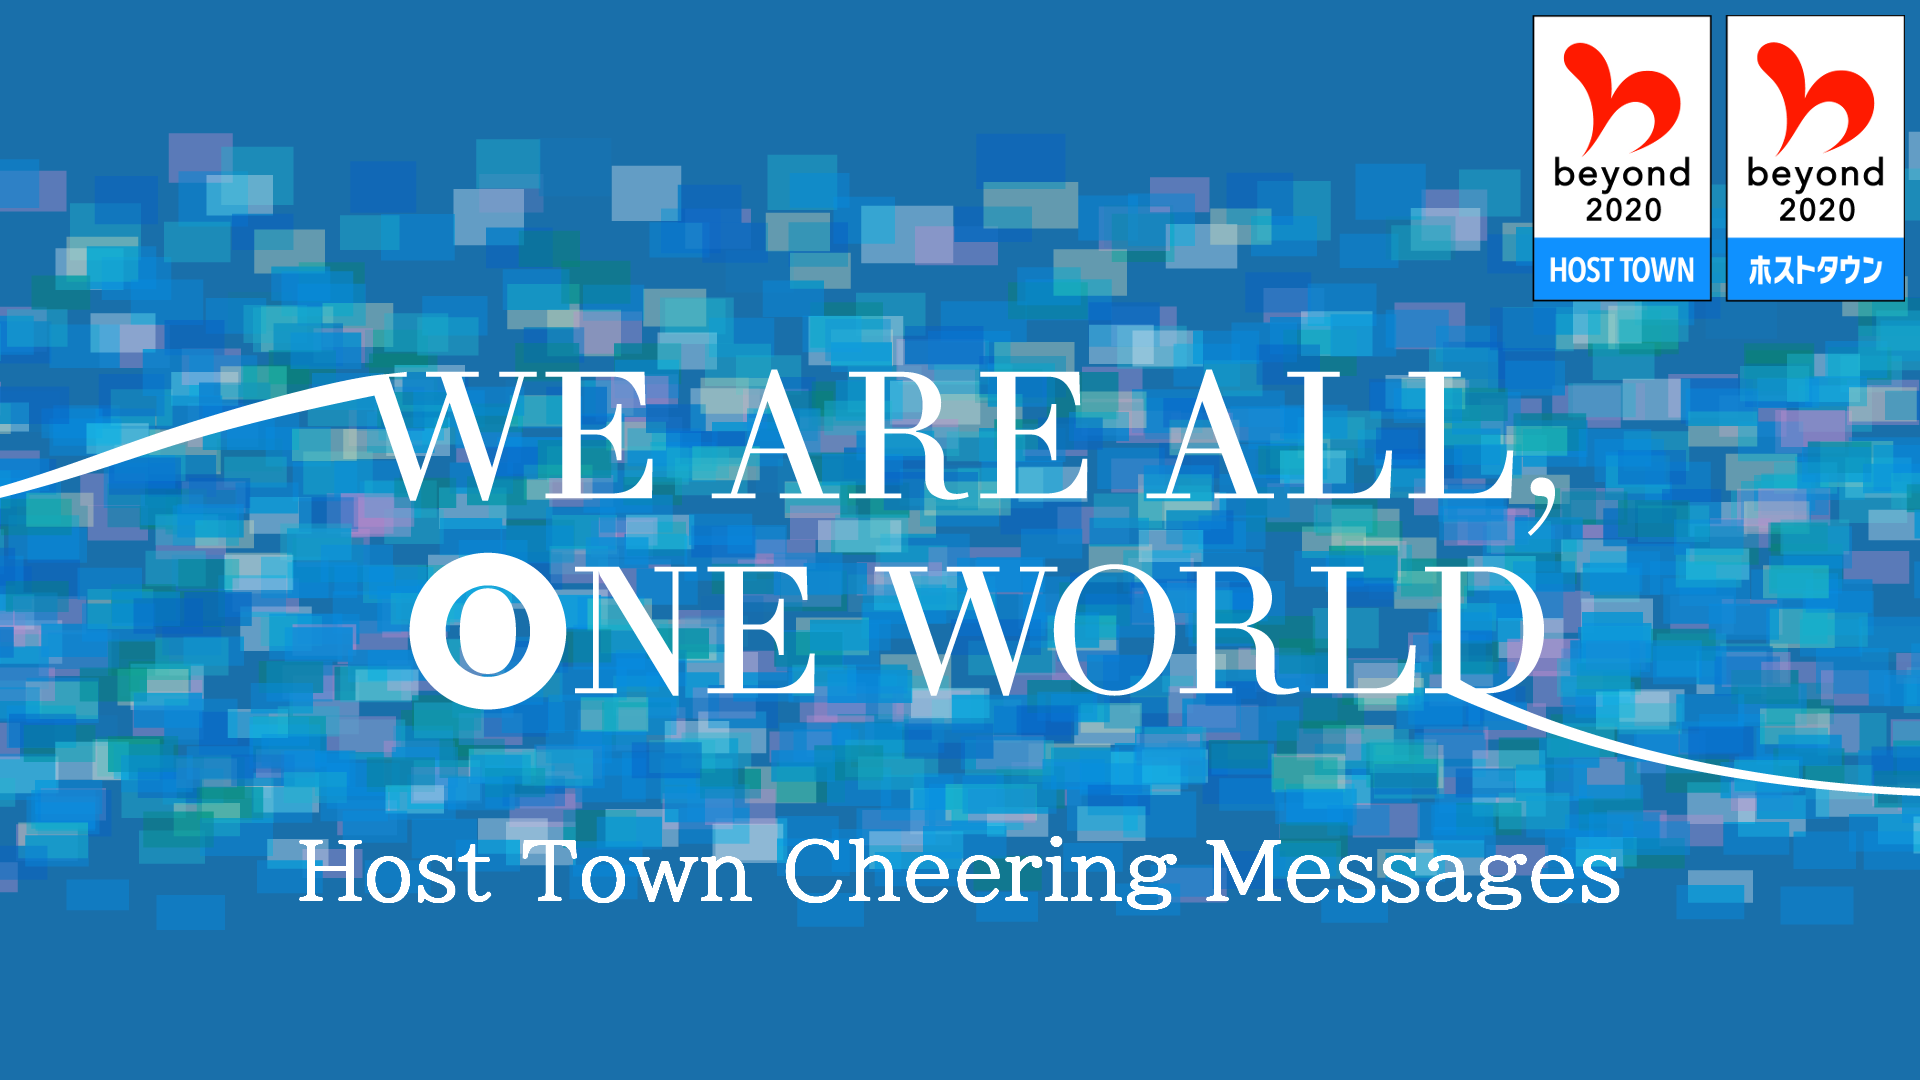 Host Town Cheering Messages